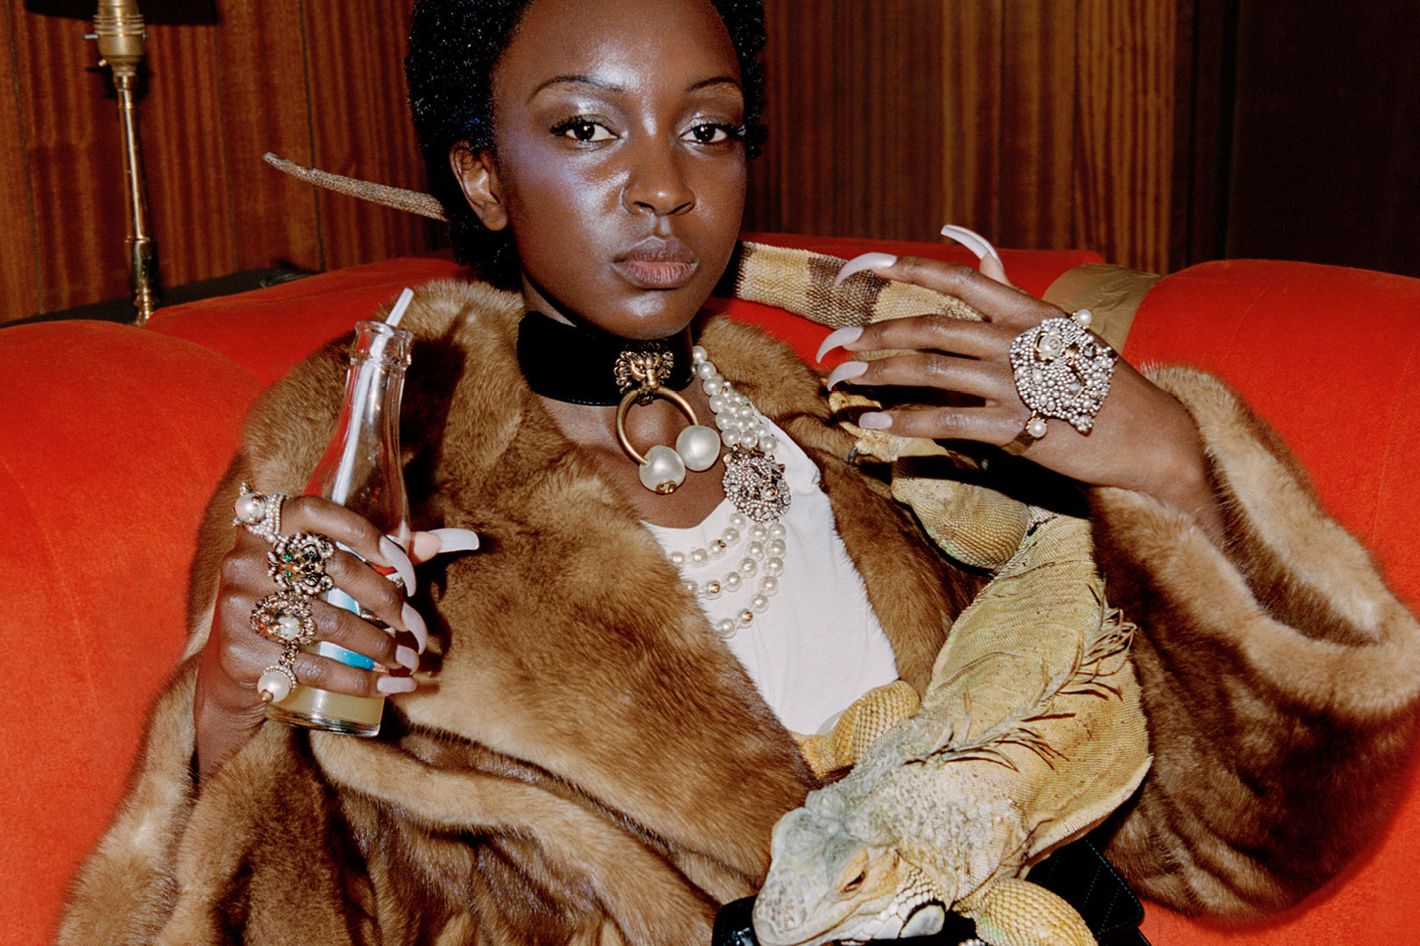 Gucci's Prefall 2017 Campaign Features Only Black Models